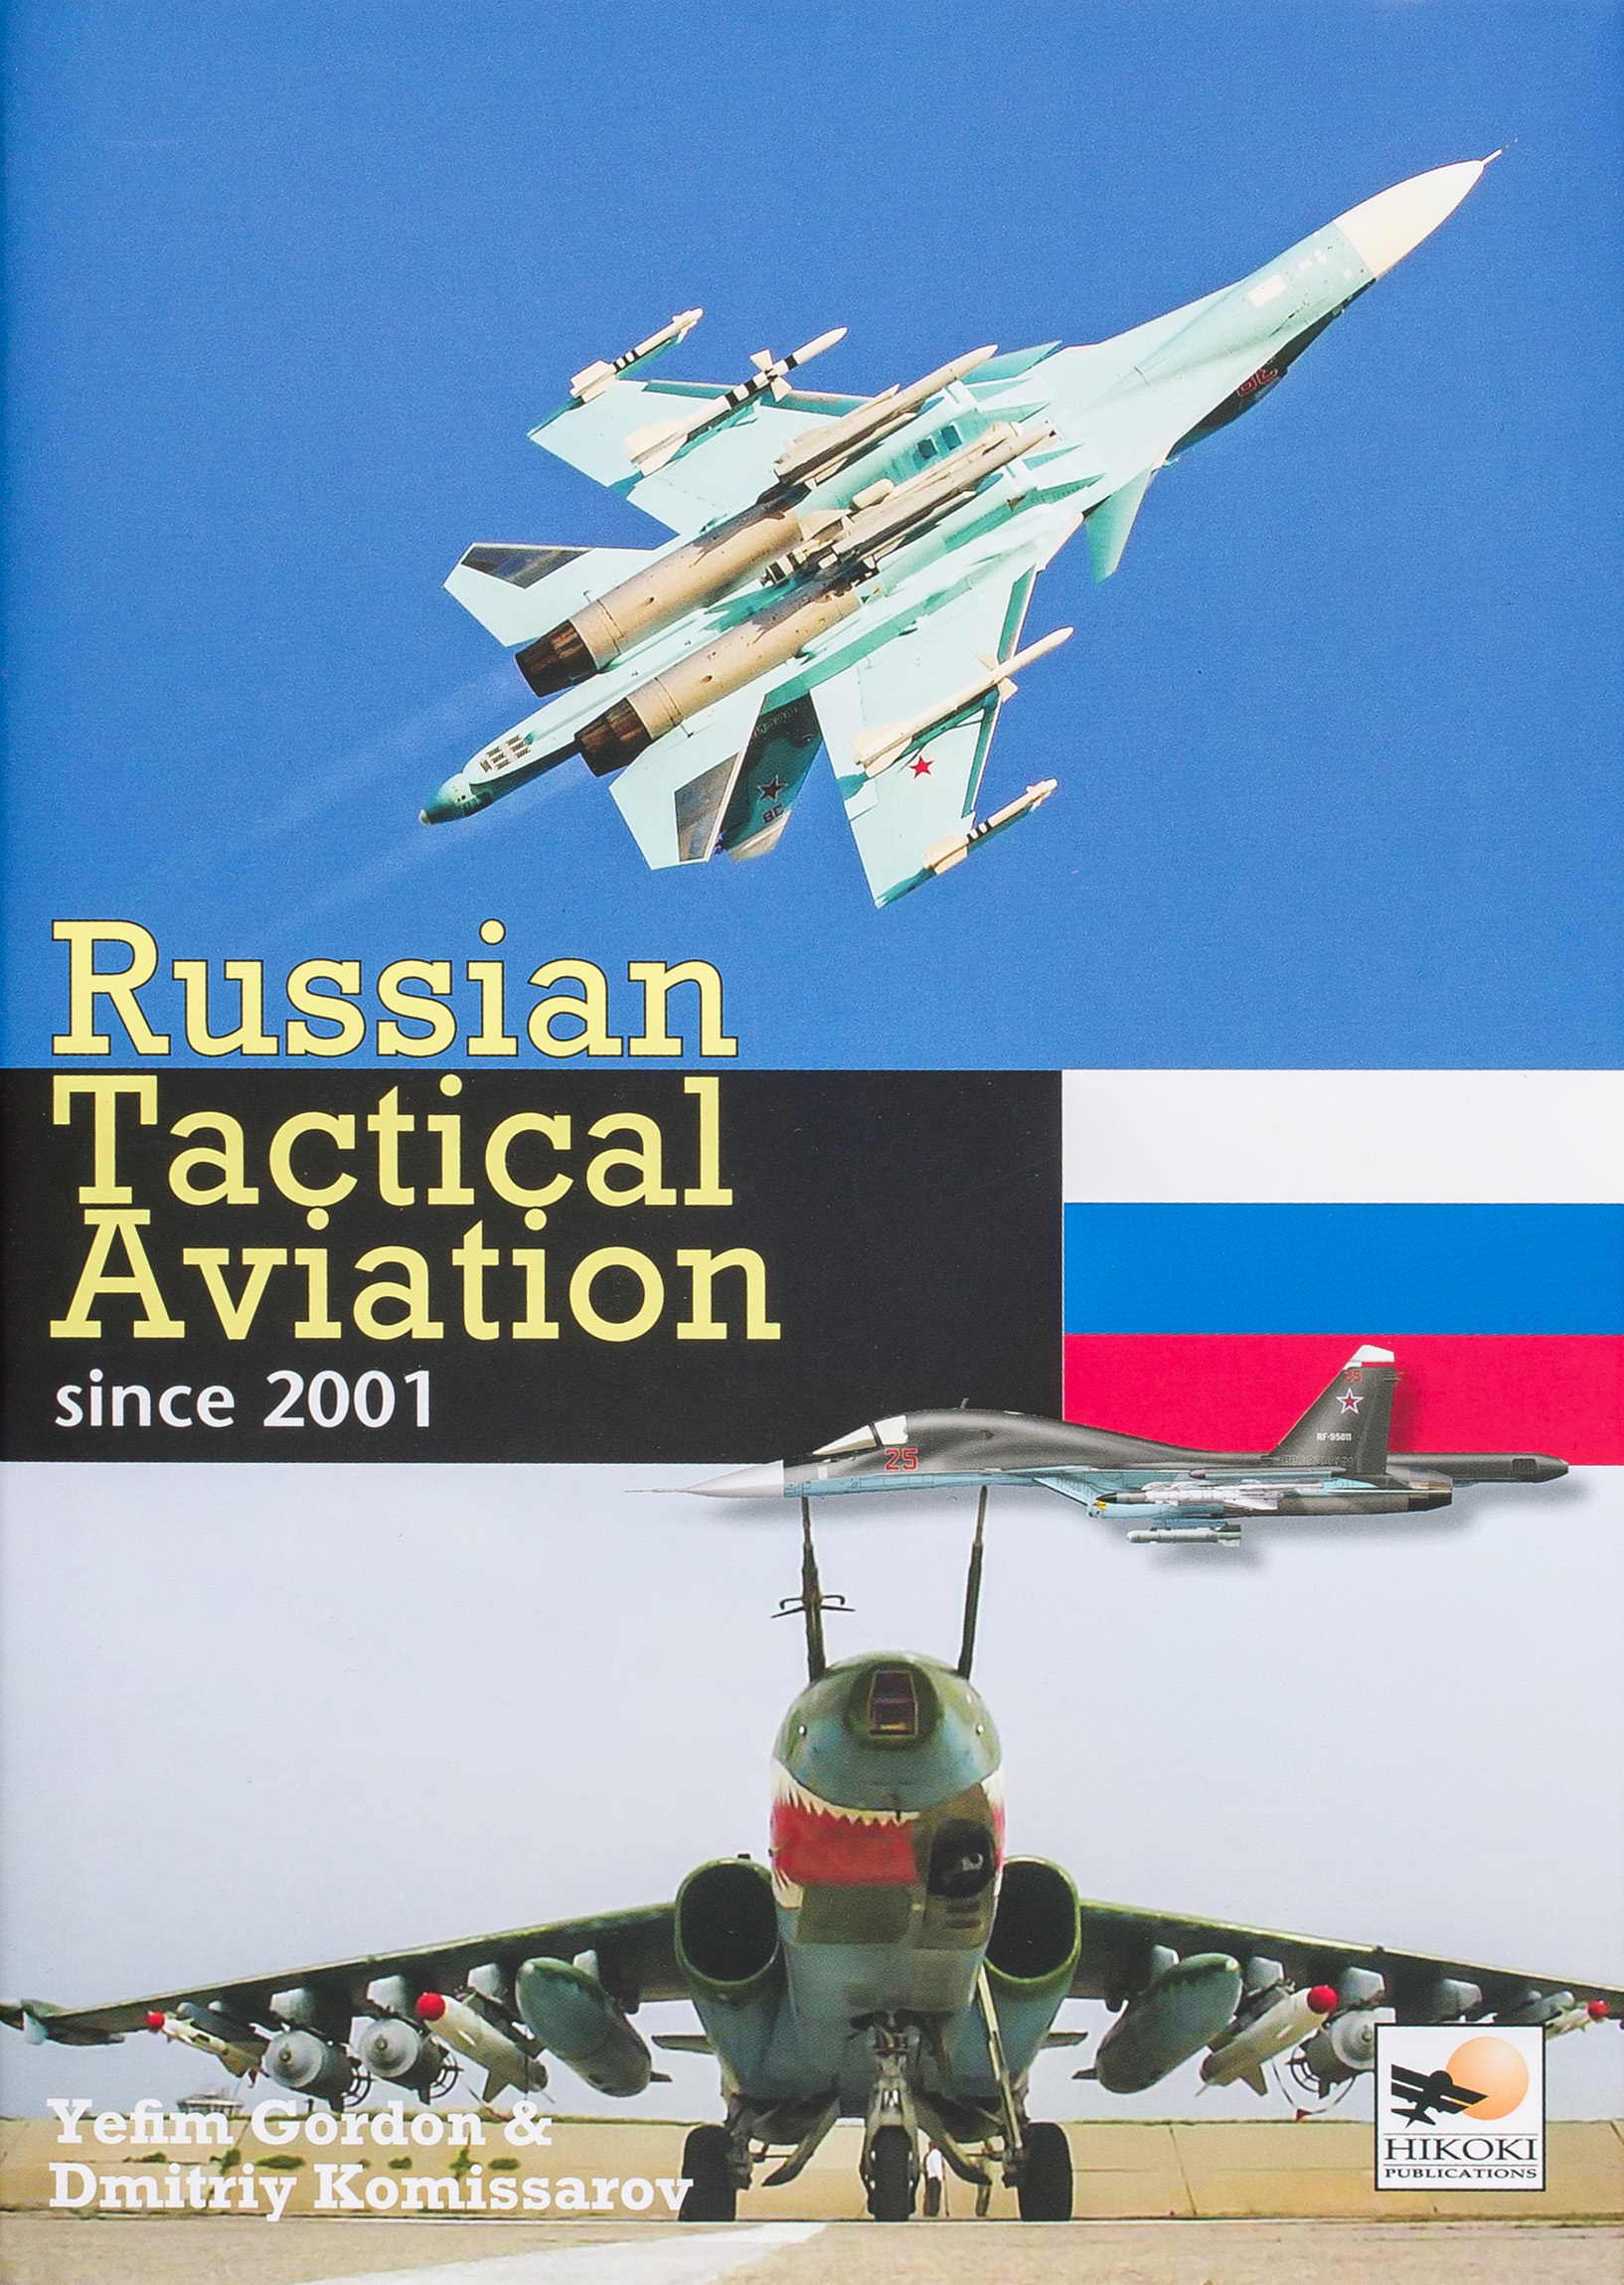 Book review of Russian Tactical Aviation Since 2001 for scale